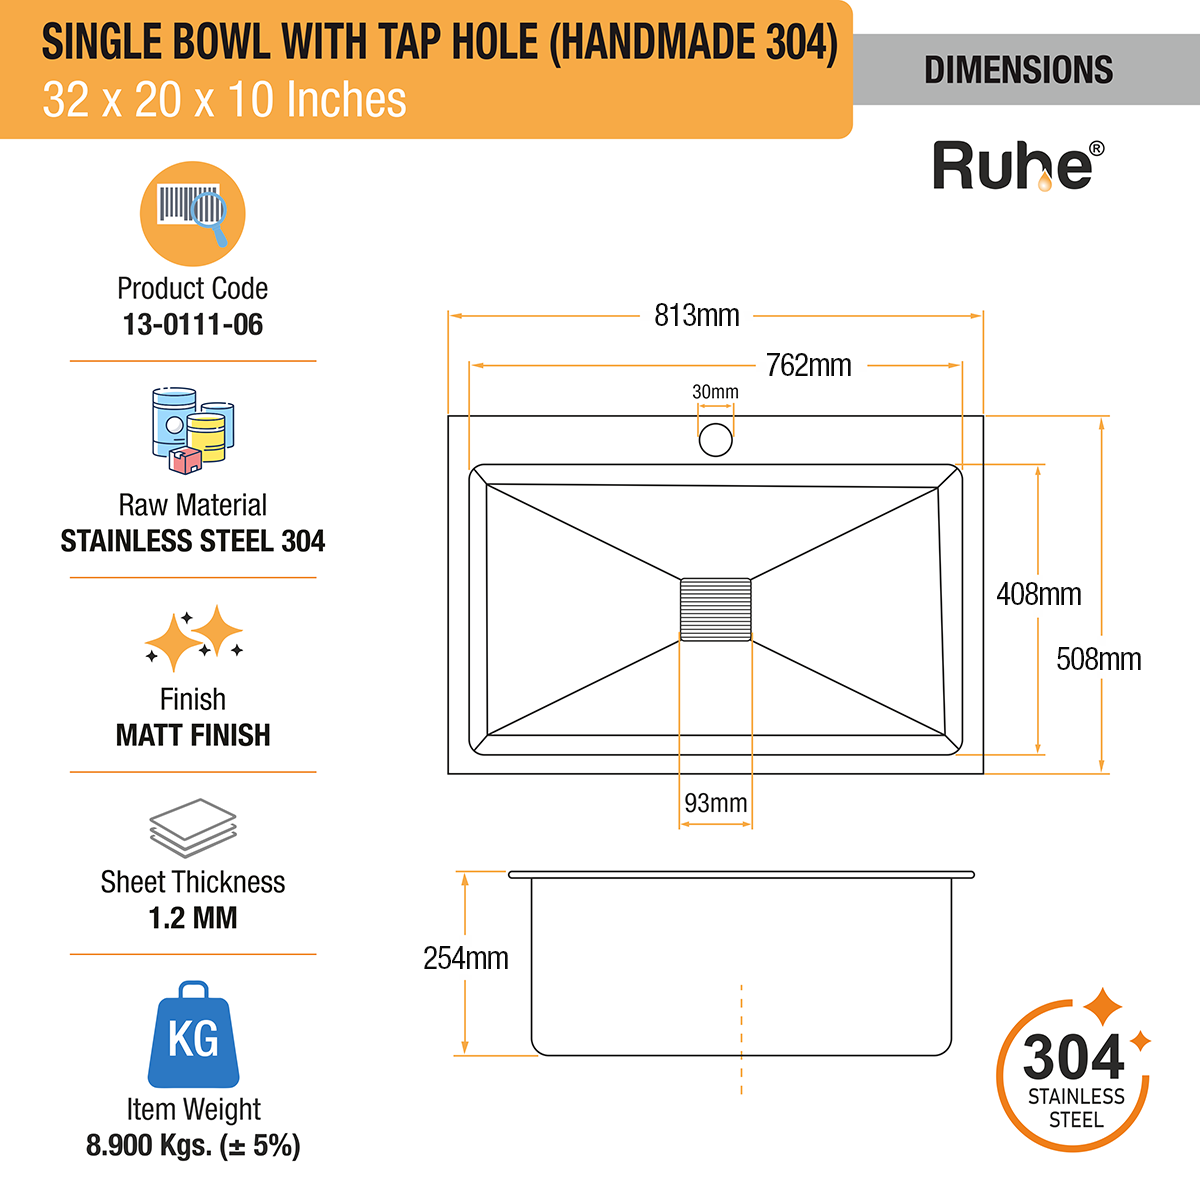 Handmade Single Bowl 304-Grade Kitchen Sink (32 x 20 x 10 Inches) with Tap Hole dimensions and sizes